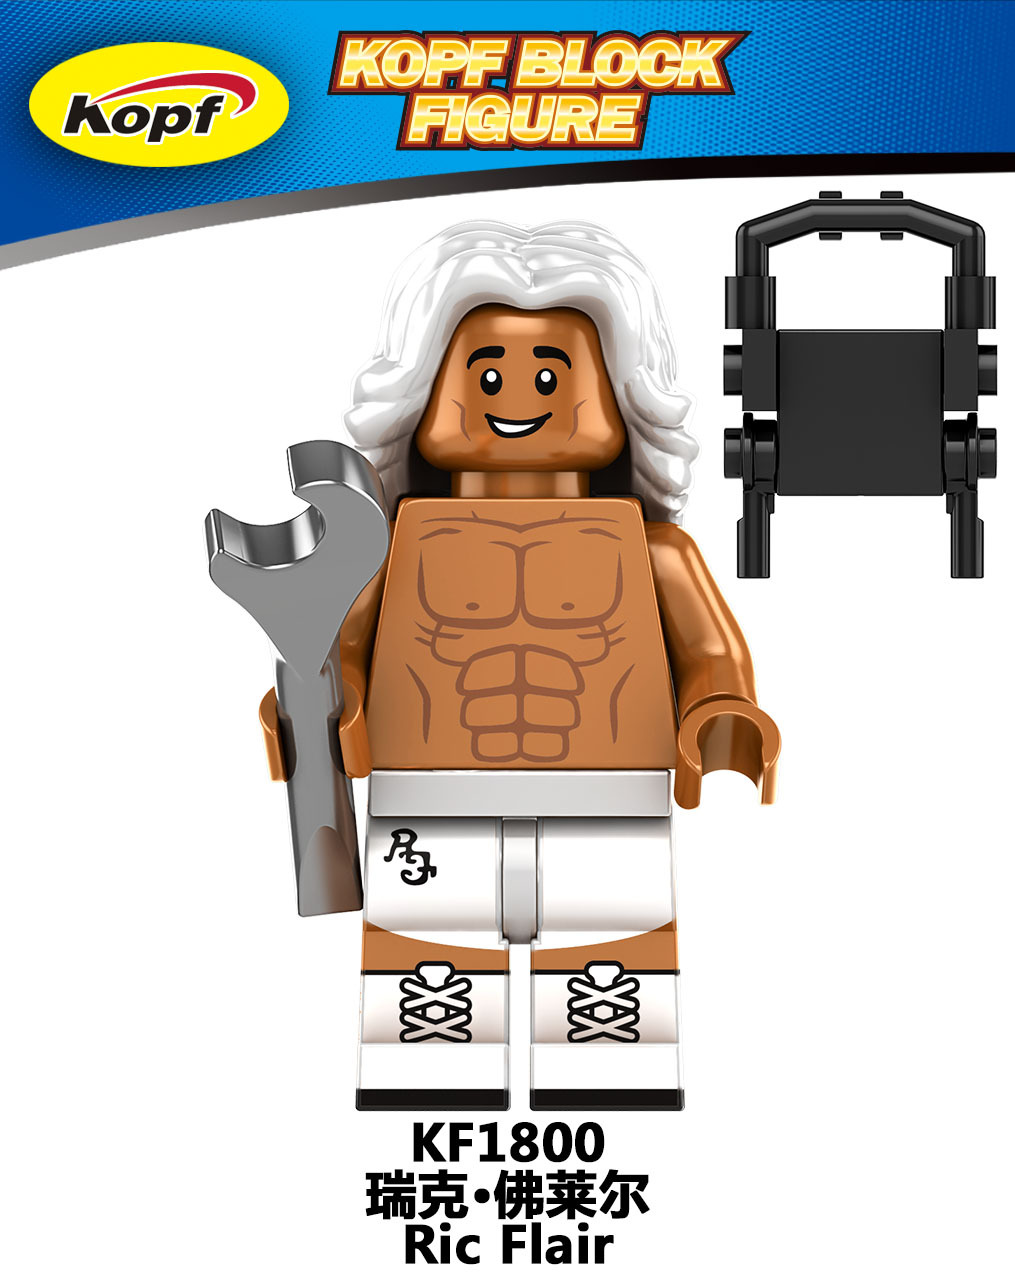 KF6171 KF1796 KF1797 KF1798 KF1799 KF1800 KF1801 KF1802 KF1803 Wrestling Superstar Rnady Savage Ted DiBiase John Cena Ric Flair The Rock StingMini Stone Cold Building Blocks Action Figures Educational Toys For Kids Gifts